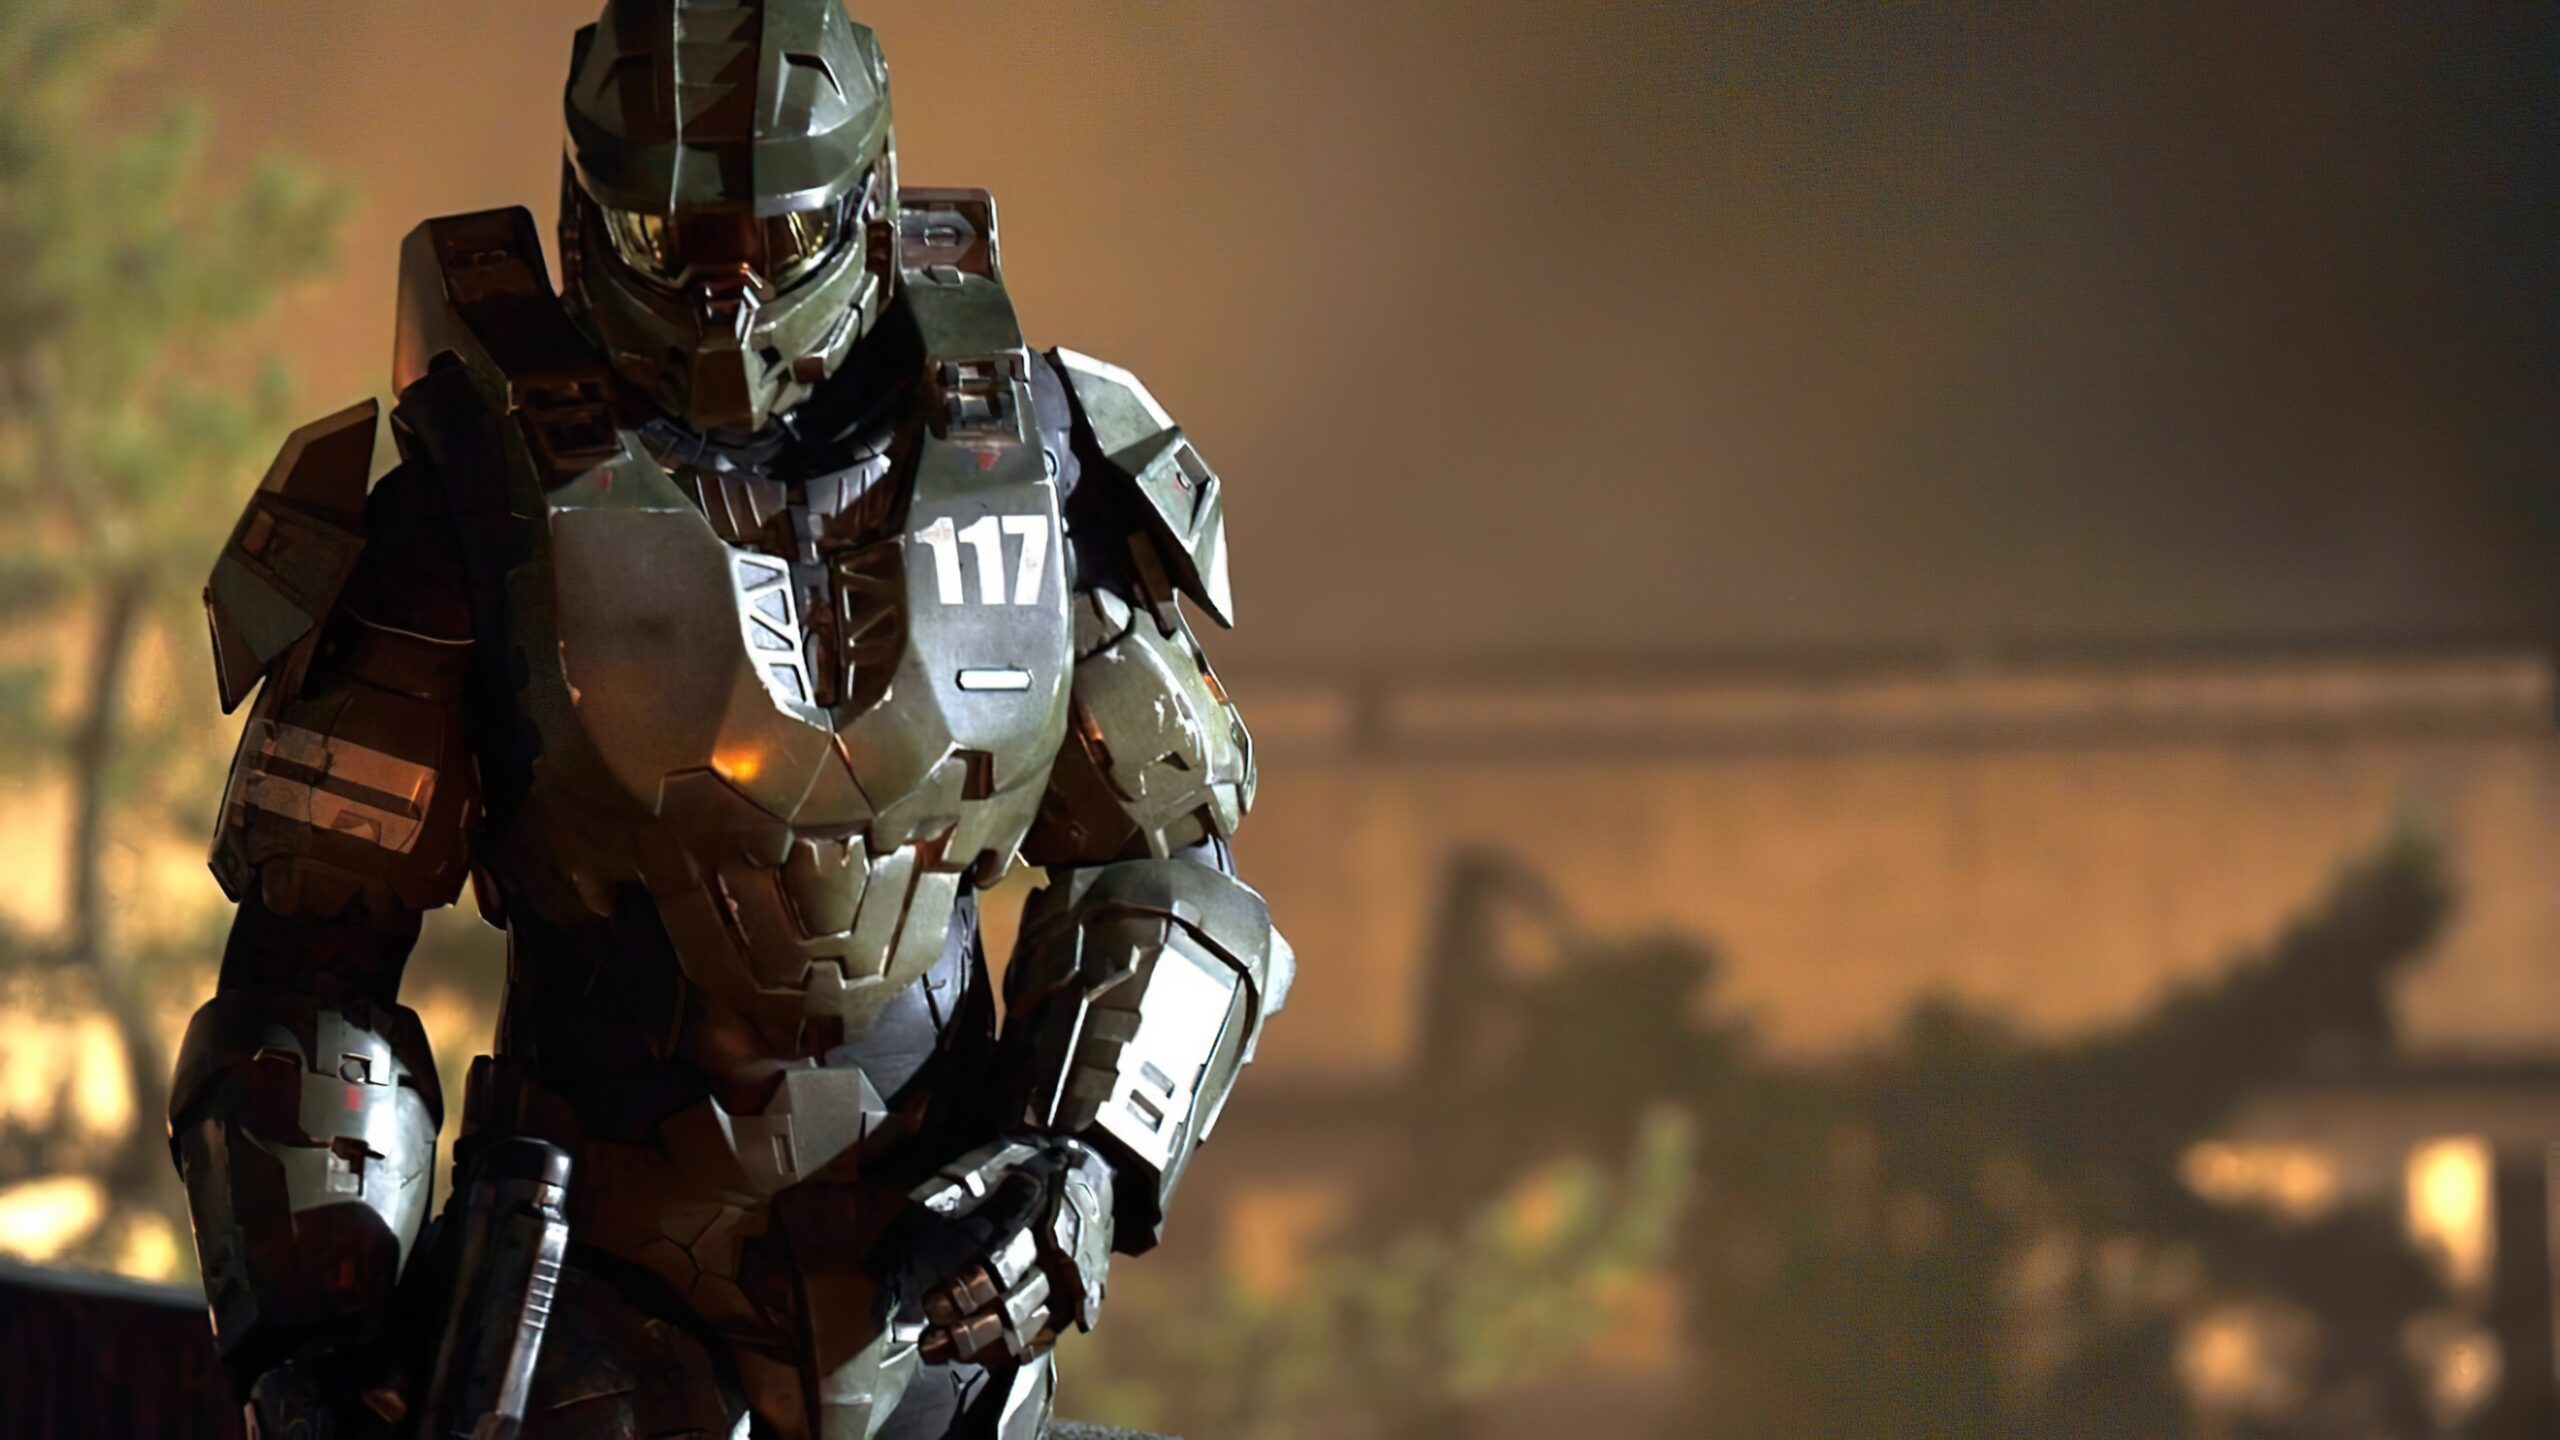 Halo (TV Series): Genetically engineered supersoldier known as "Spartan-117". 2560x1440 HD Background.